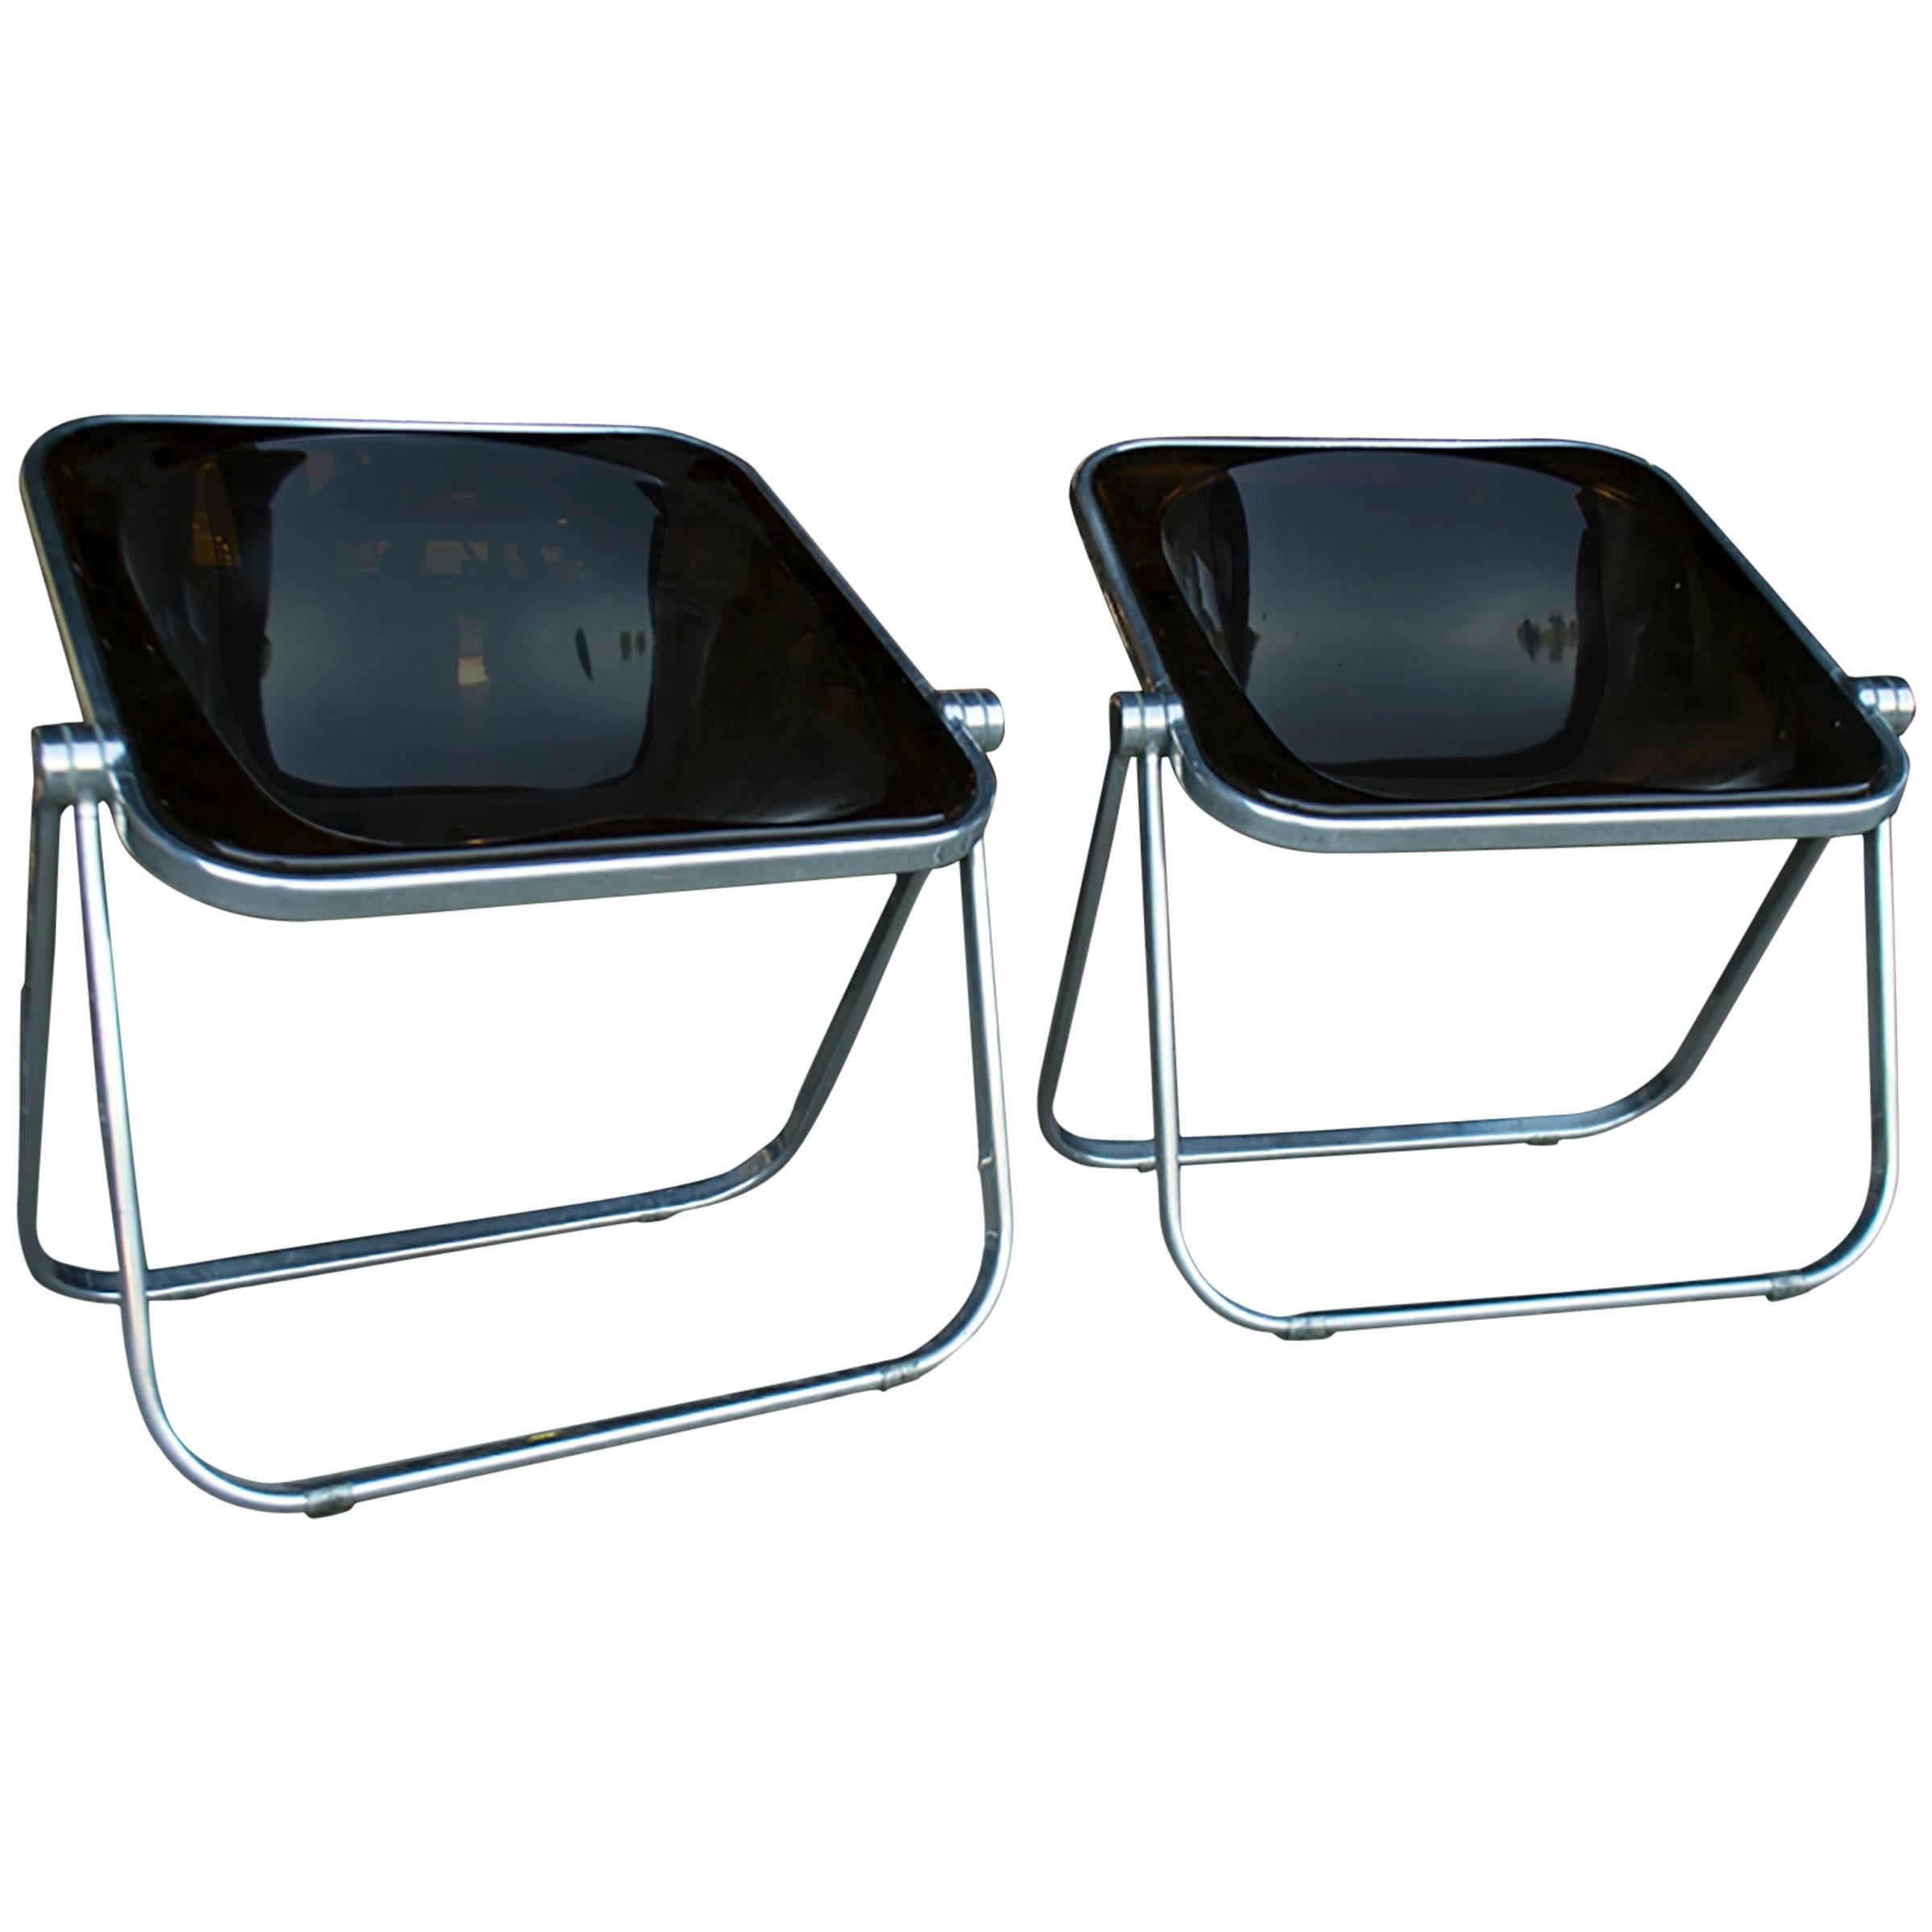 Pair of Plona Folding Chairs For Sale